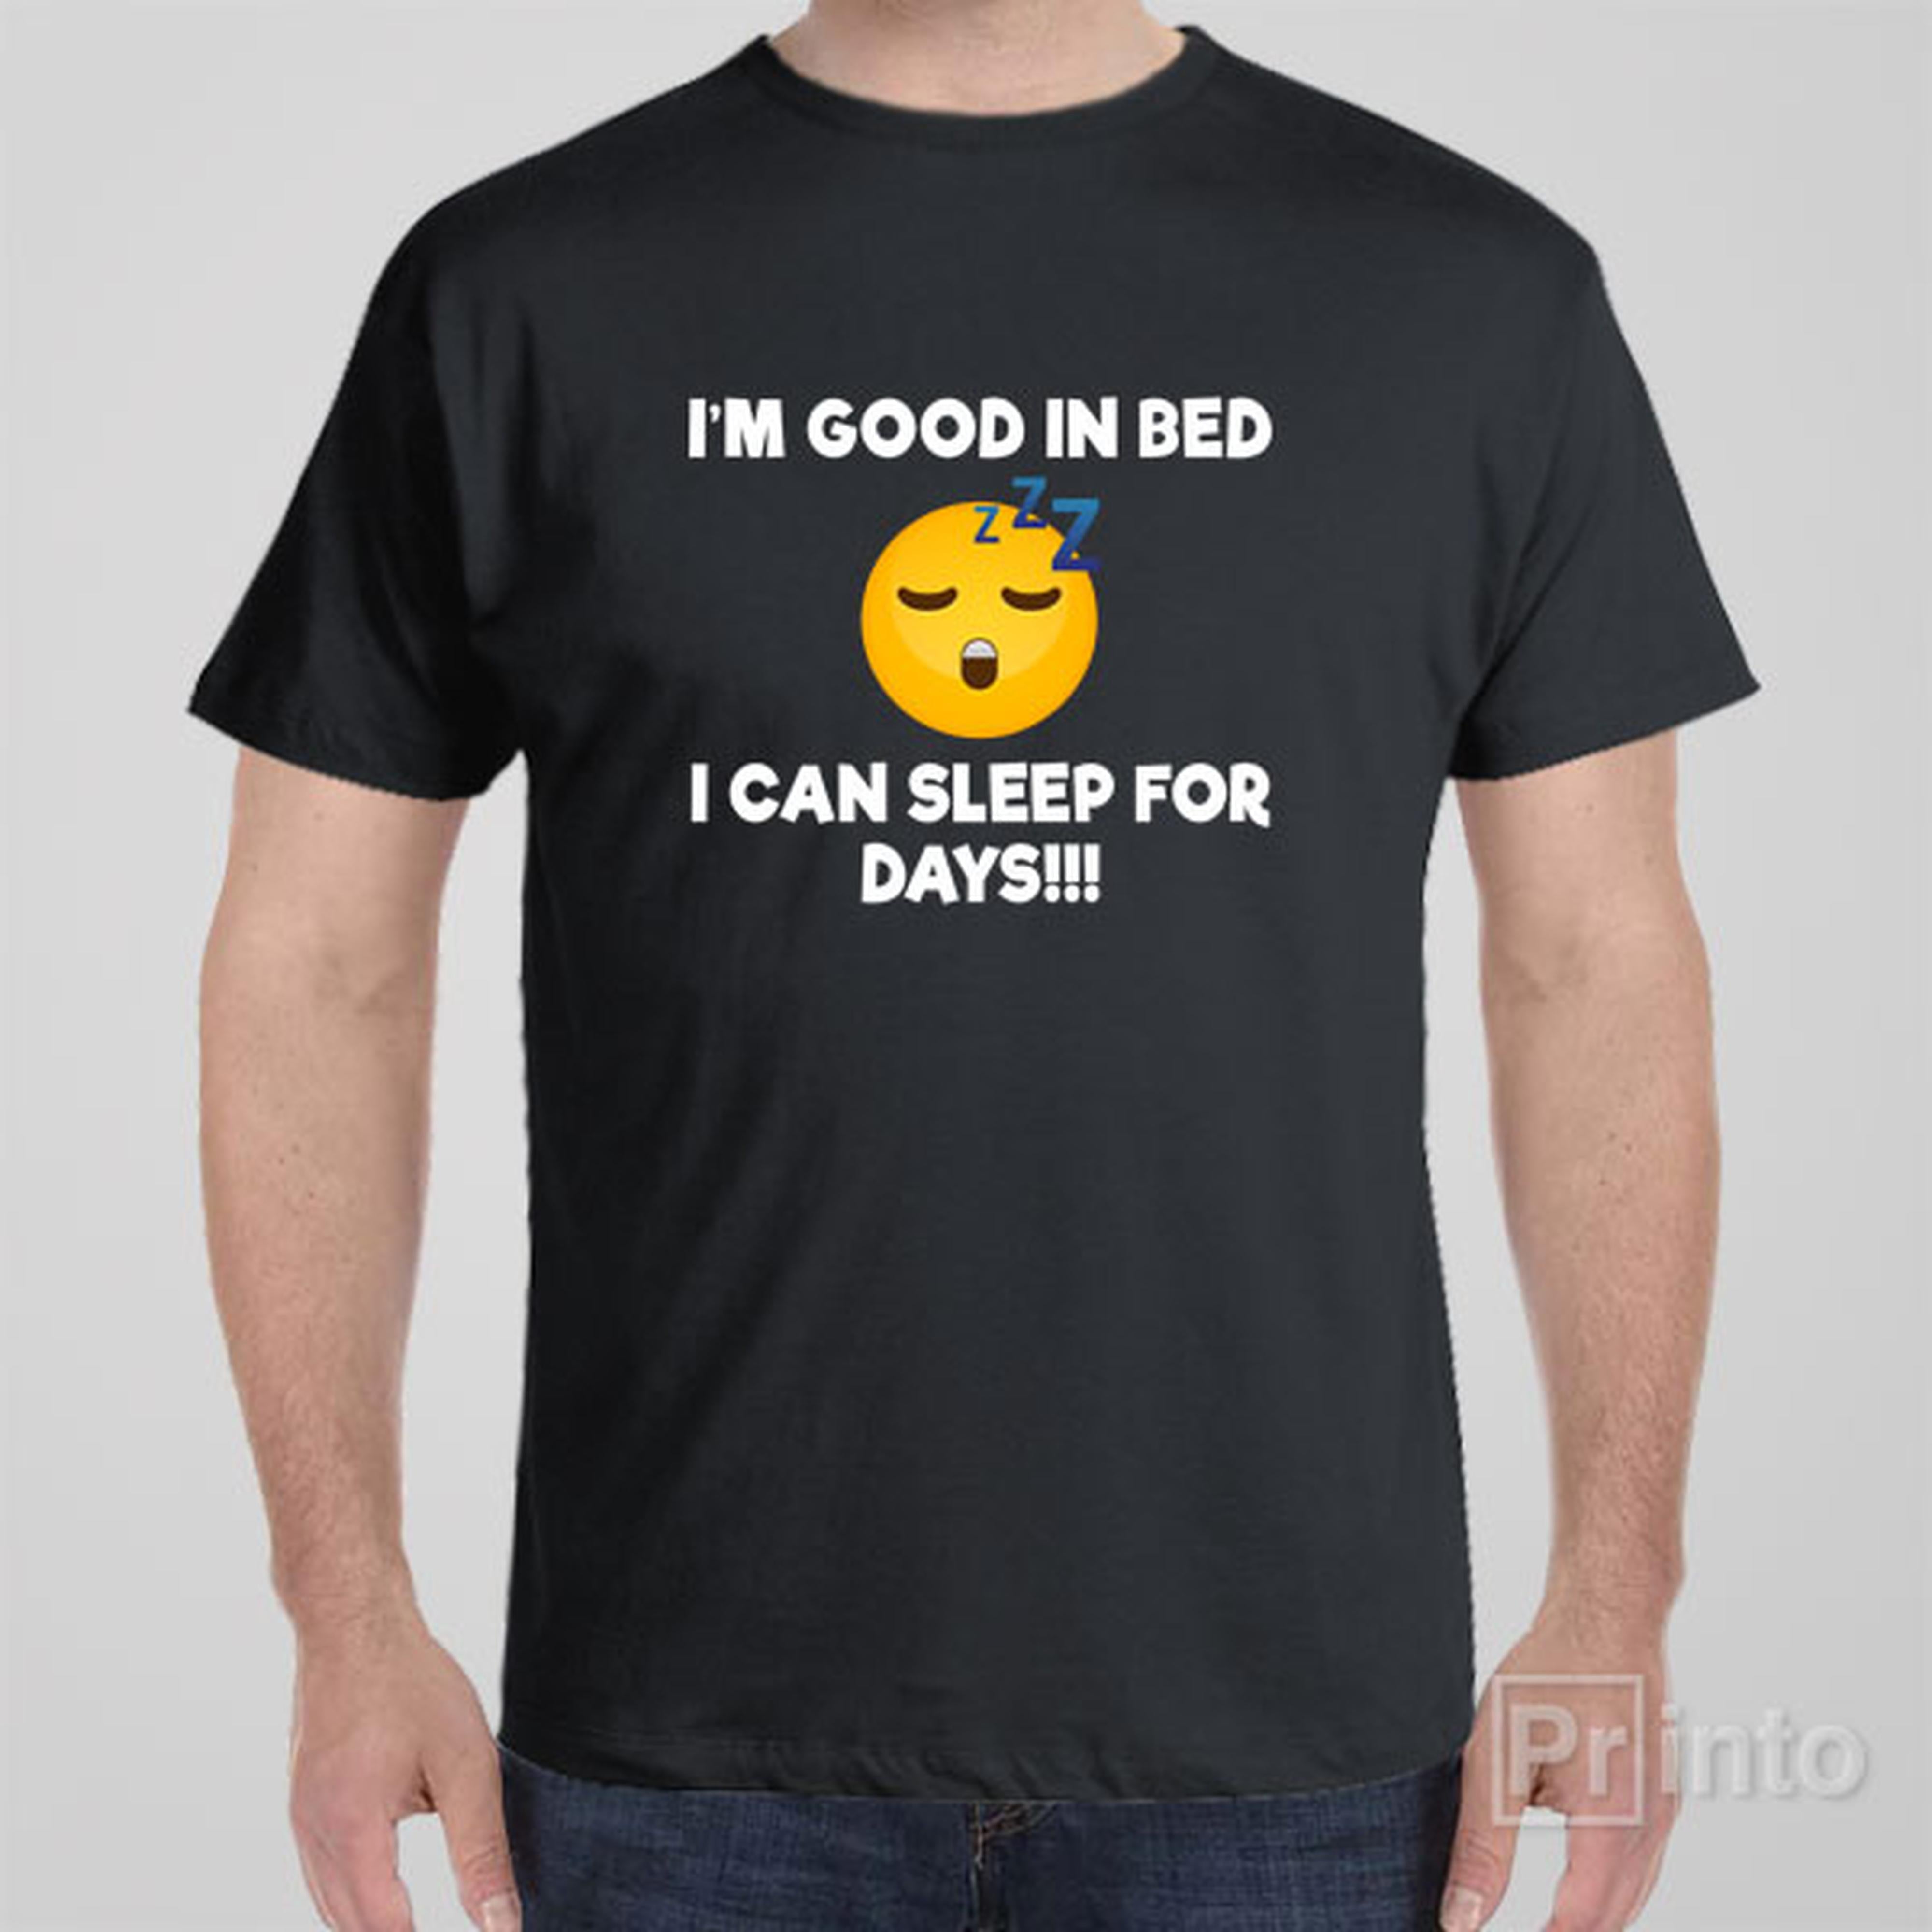 im-good-in-bed-t-shirt